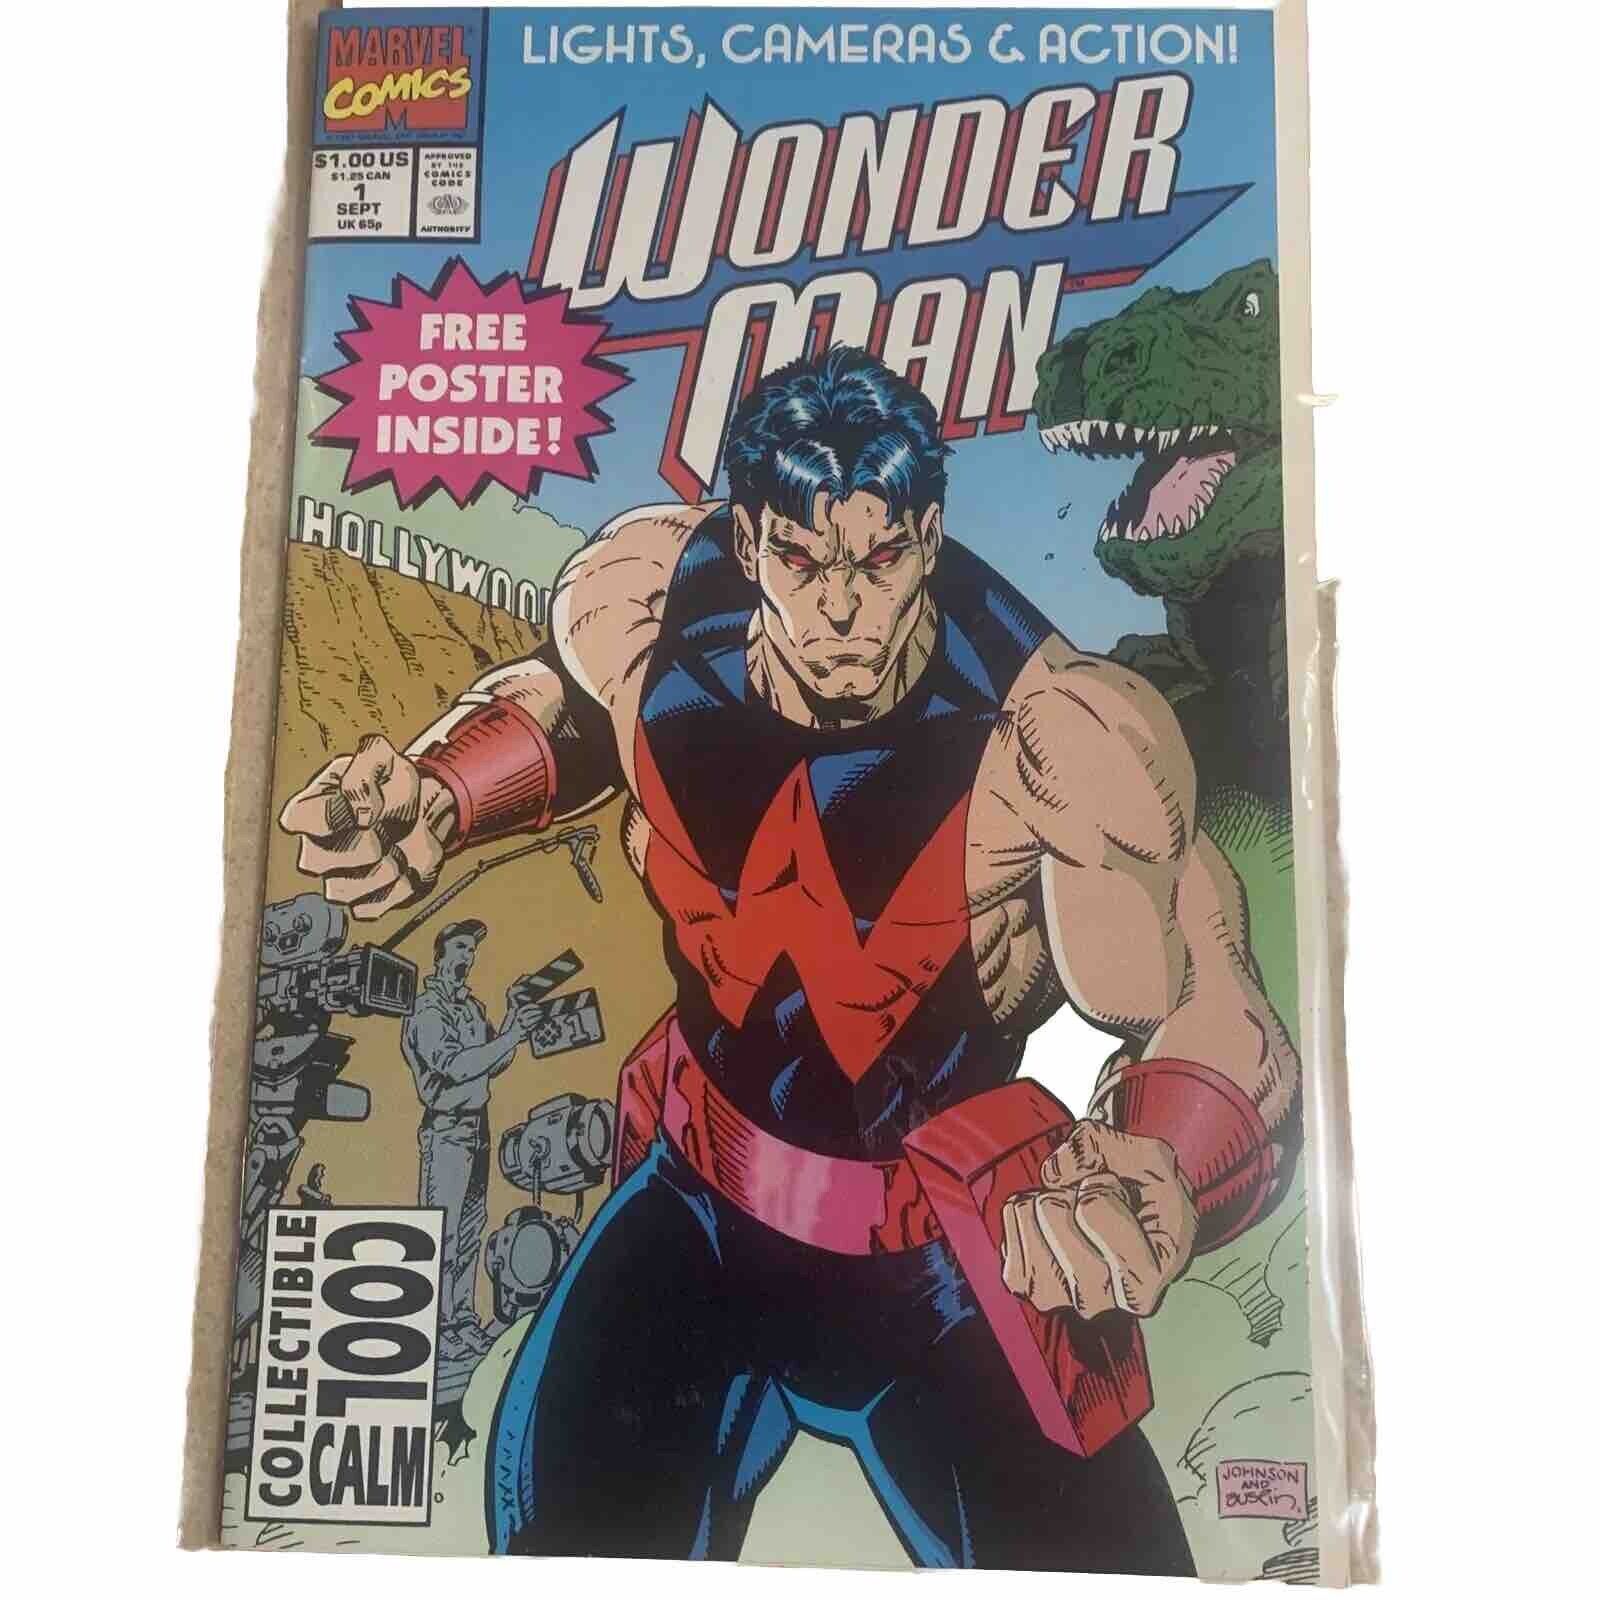 WONDER MAN Vol 1 No 1 Sept. 1991 with Poster Never Read Marvel Comic Near Mint